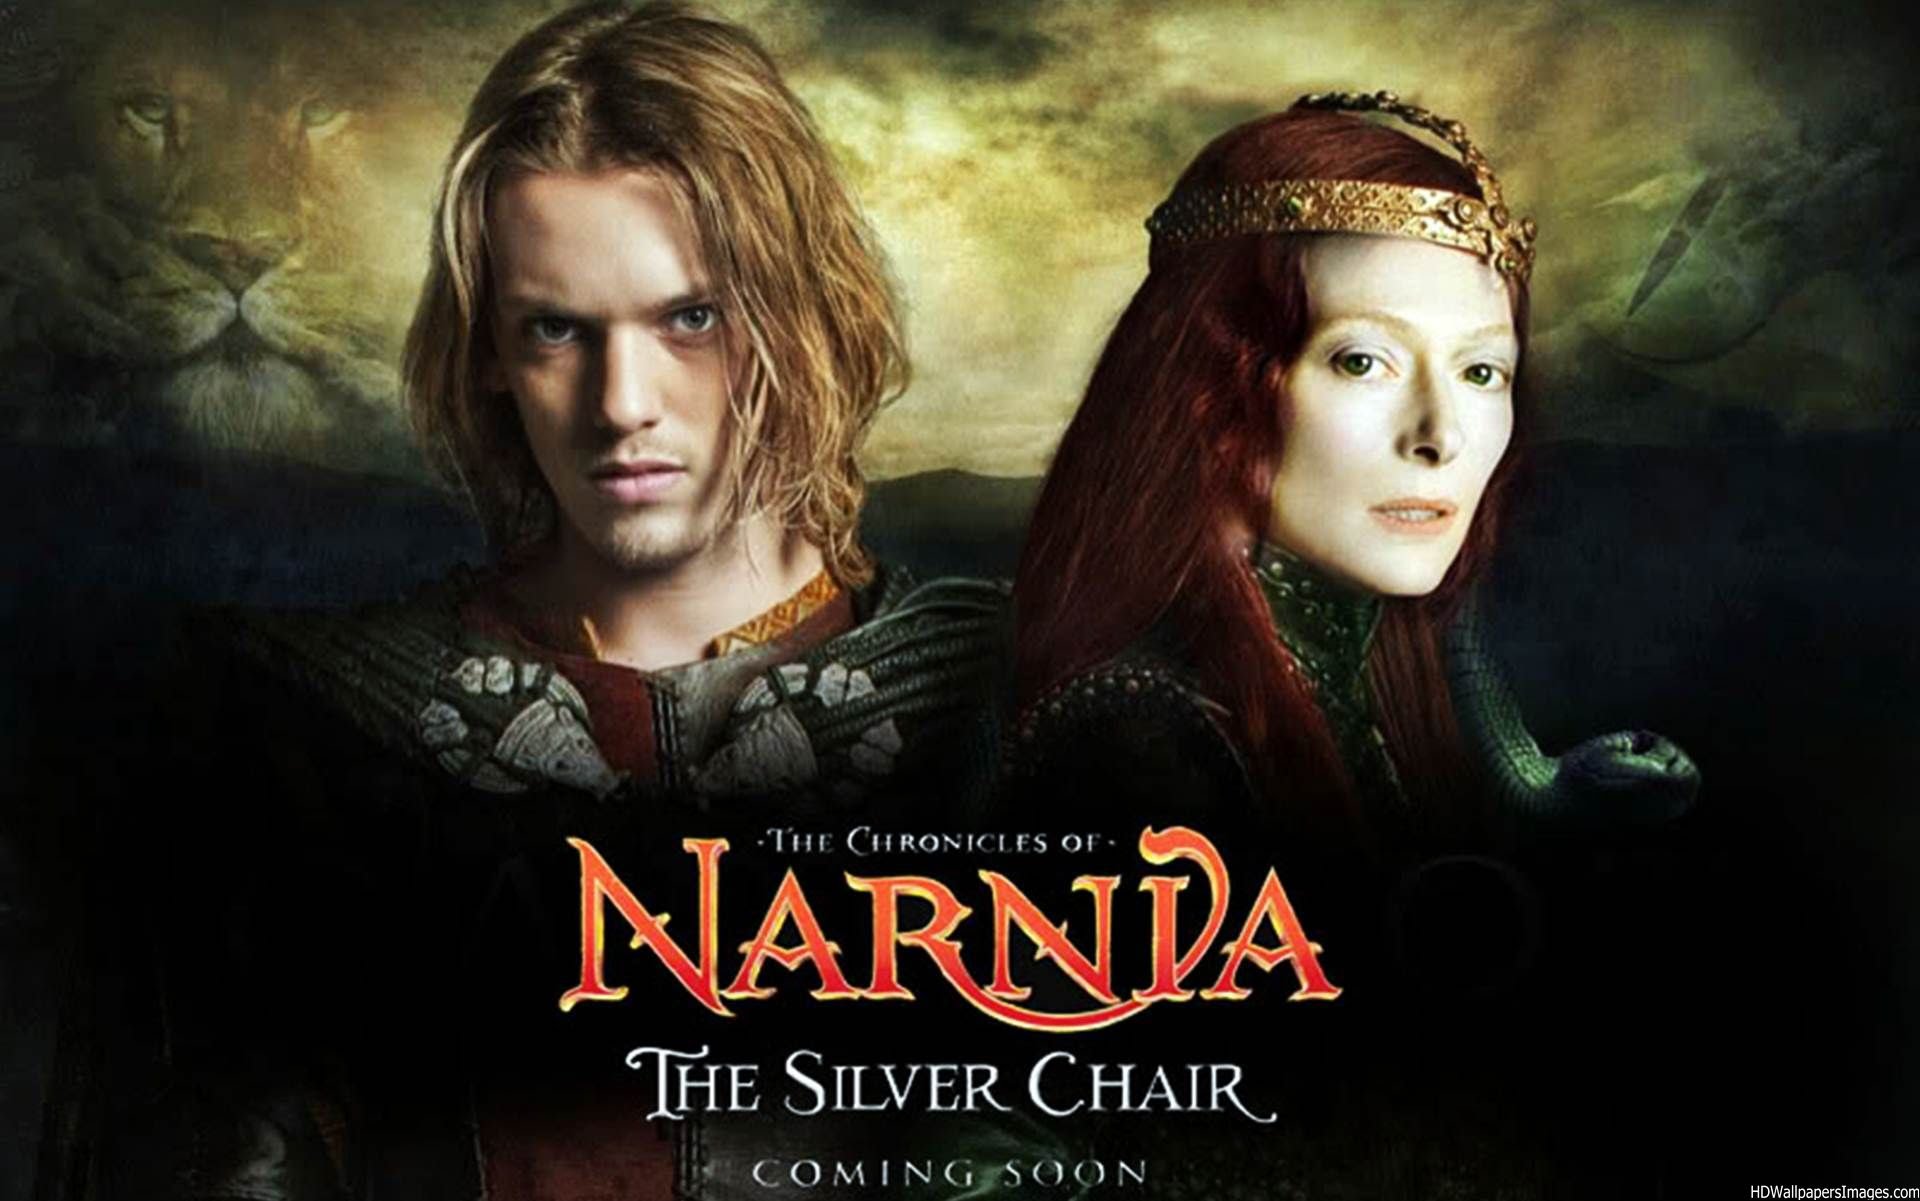 The Chronicles of Narnia - 3 1080p dual audio movie